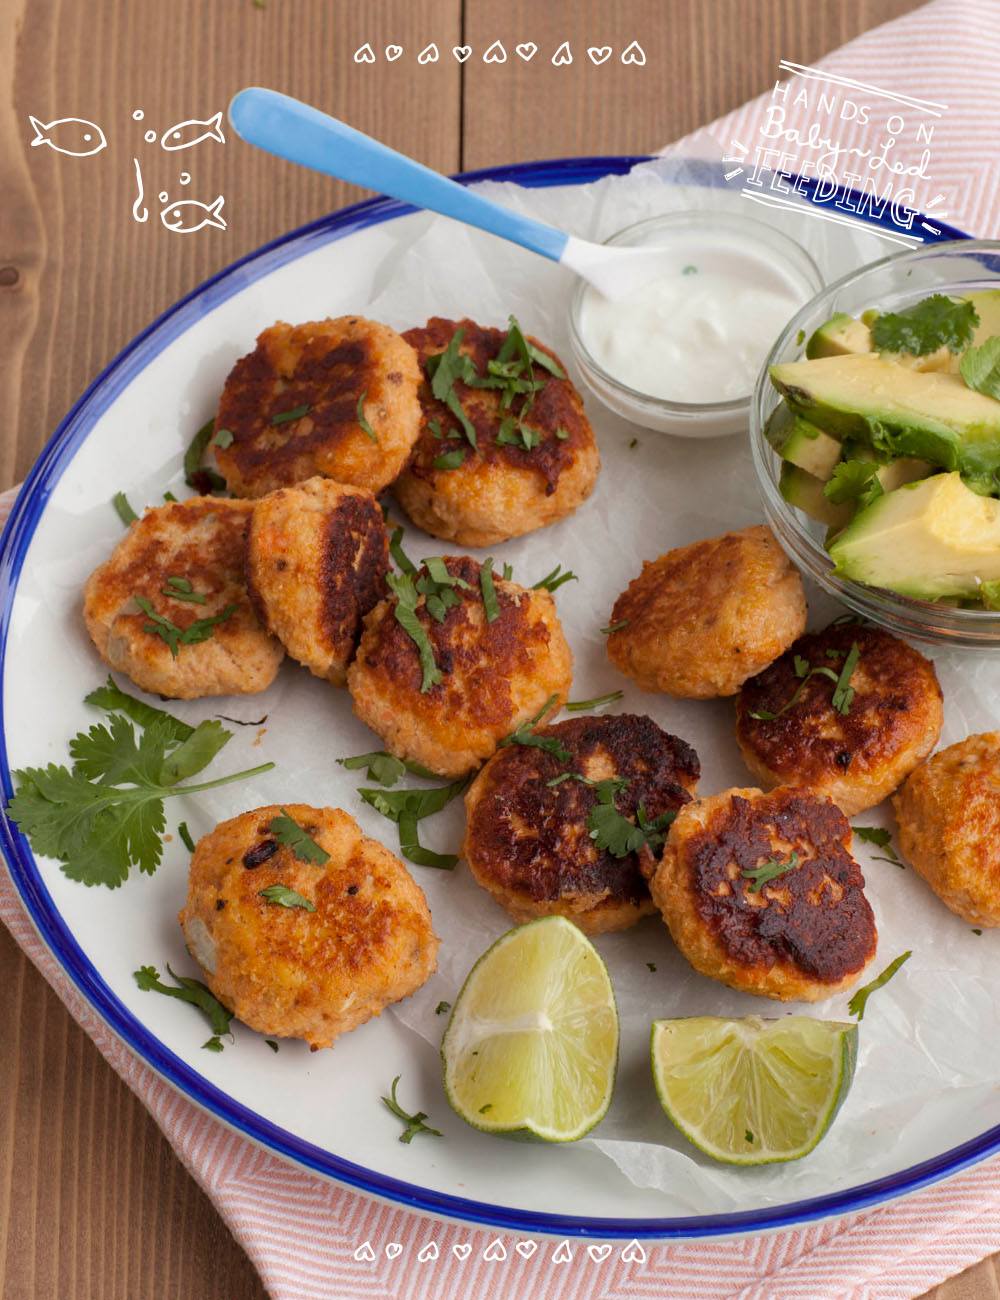 Baby led weaning fish cakes with avocado and mint yogurt dip. This is a perfect baby lunch recipe packed with Omega-3 rich fish and full of vitamins. Lunch ideas for baby led weaning. BLW lunch recipe.